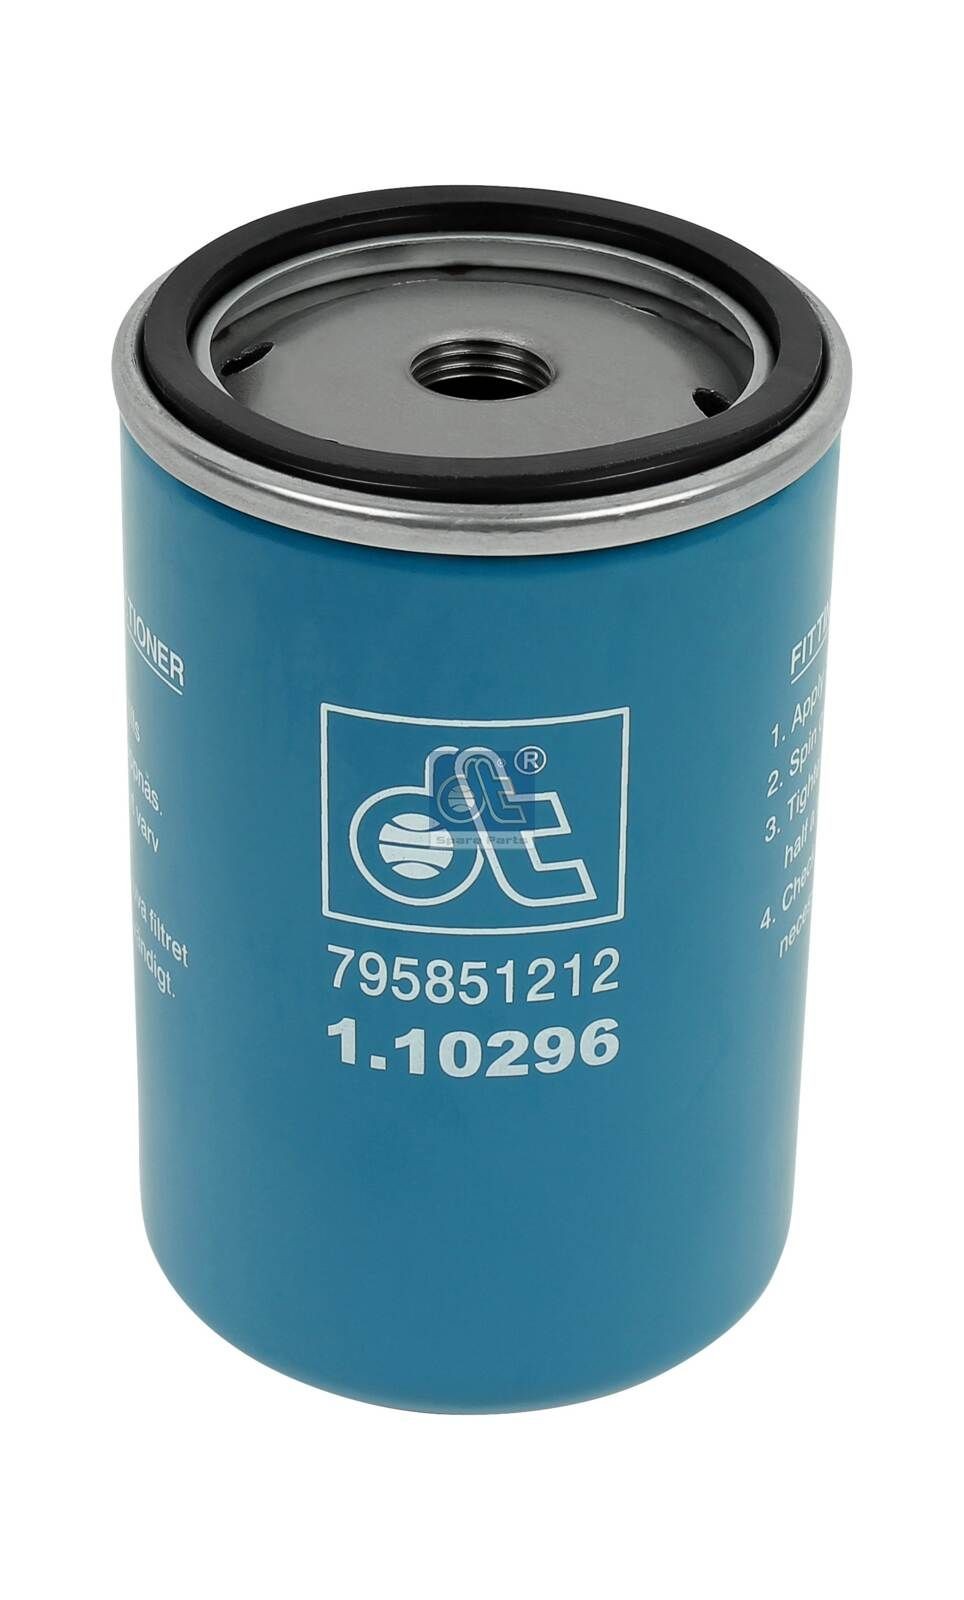 WK 723/1 DT Spare Parts 1.10296 Fuel filter 0 116 0243